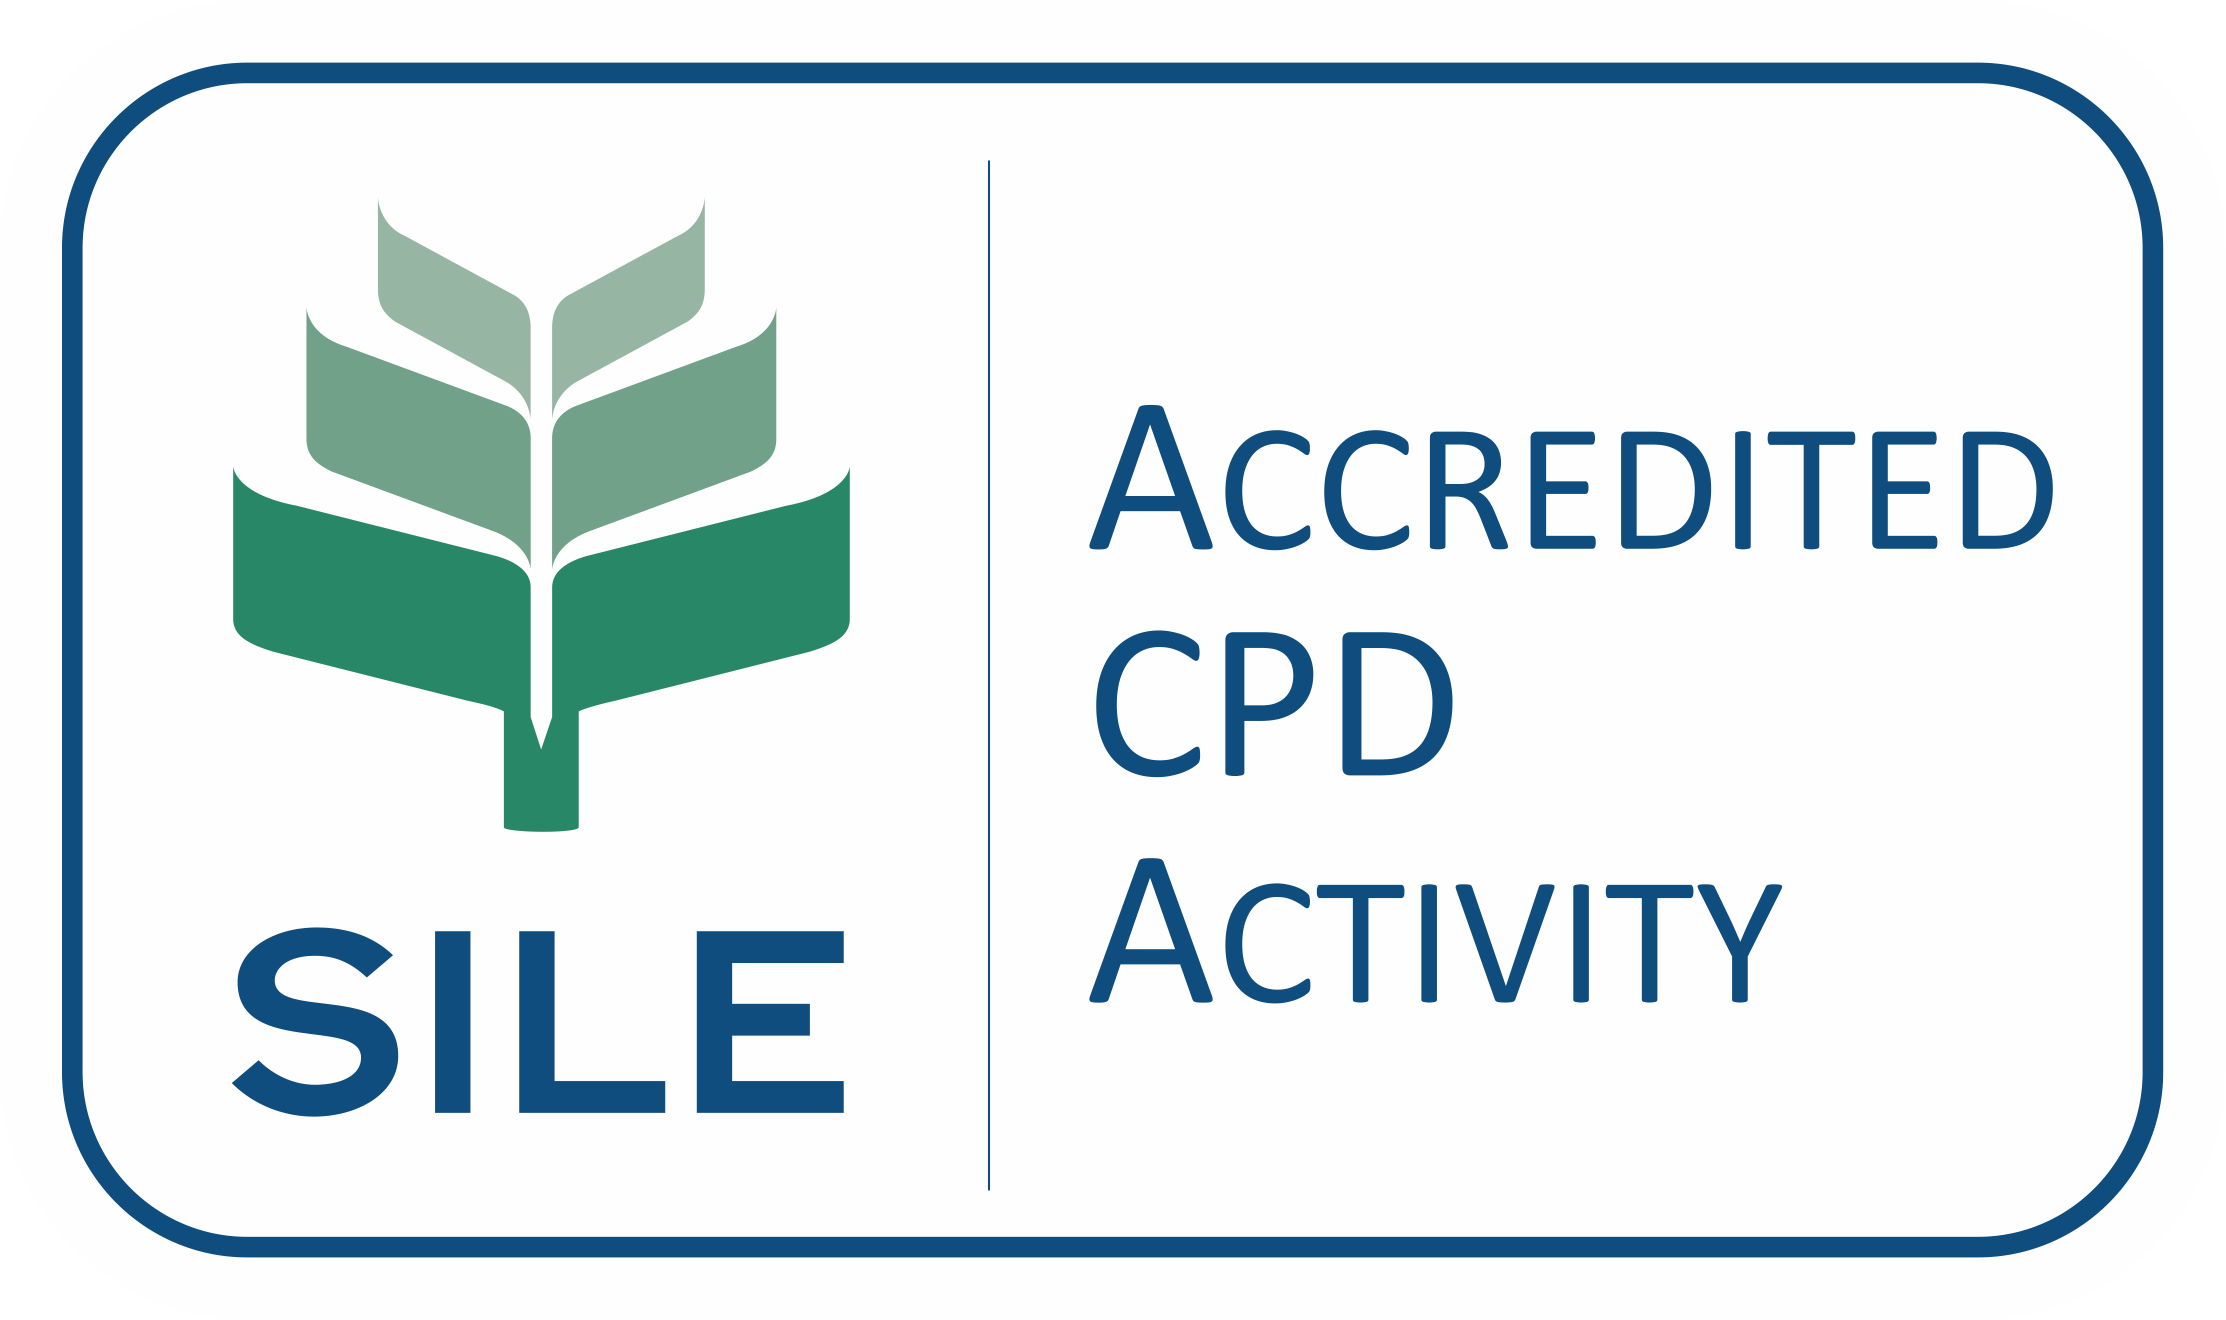 SILE Accredited CPD Activity B-W  (HORIZONTAL).png